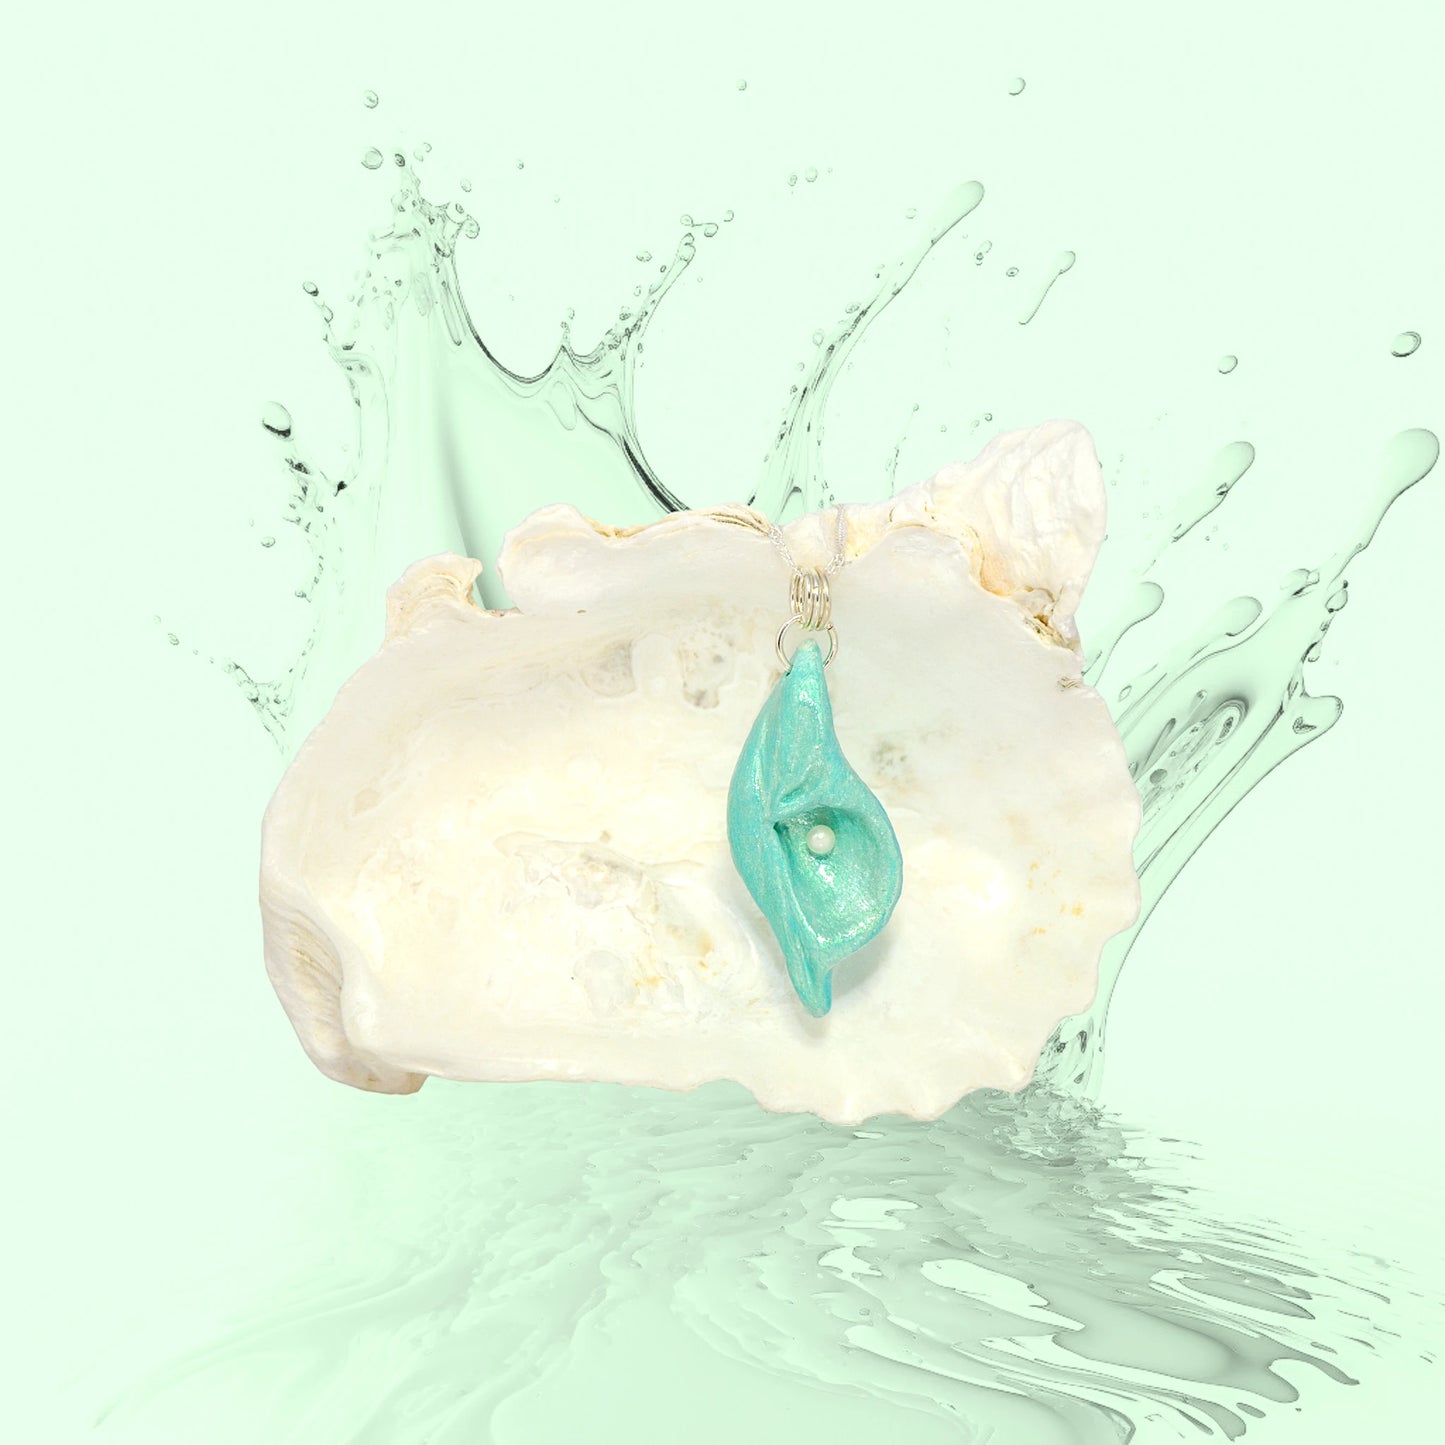 Ocean Pearl natural seashell pendant has a  real freshwater baby pearl.  The pendant is shown in front of a larger seashell that appears to be making a splash in sea green water.